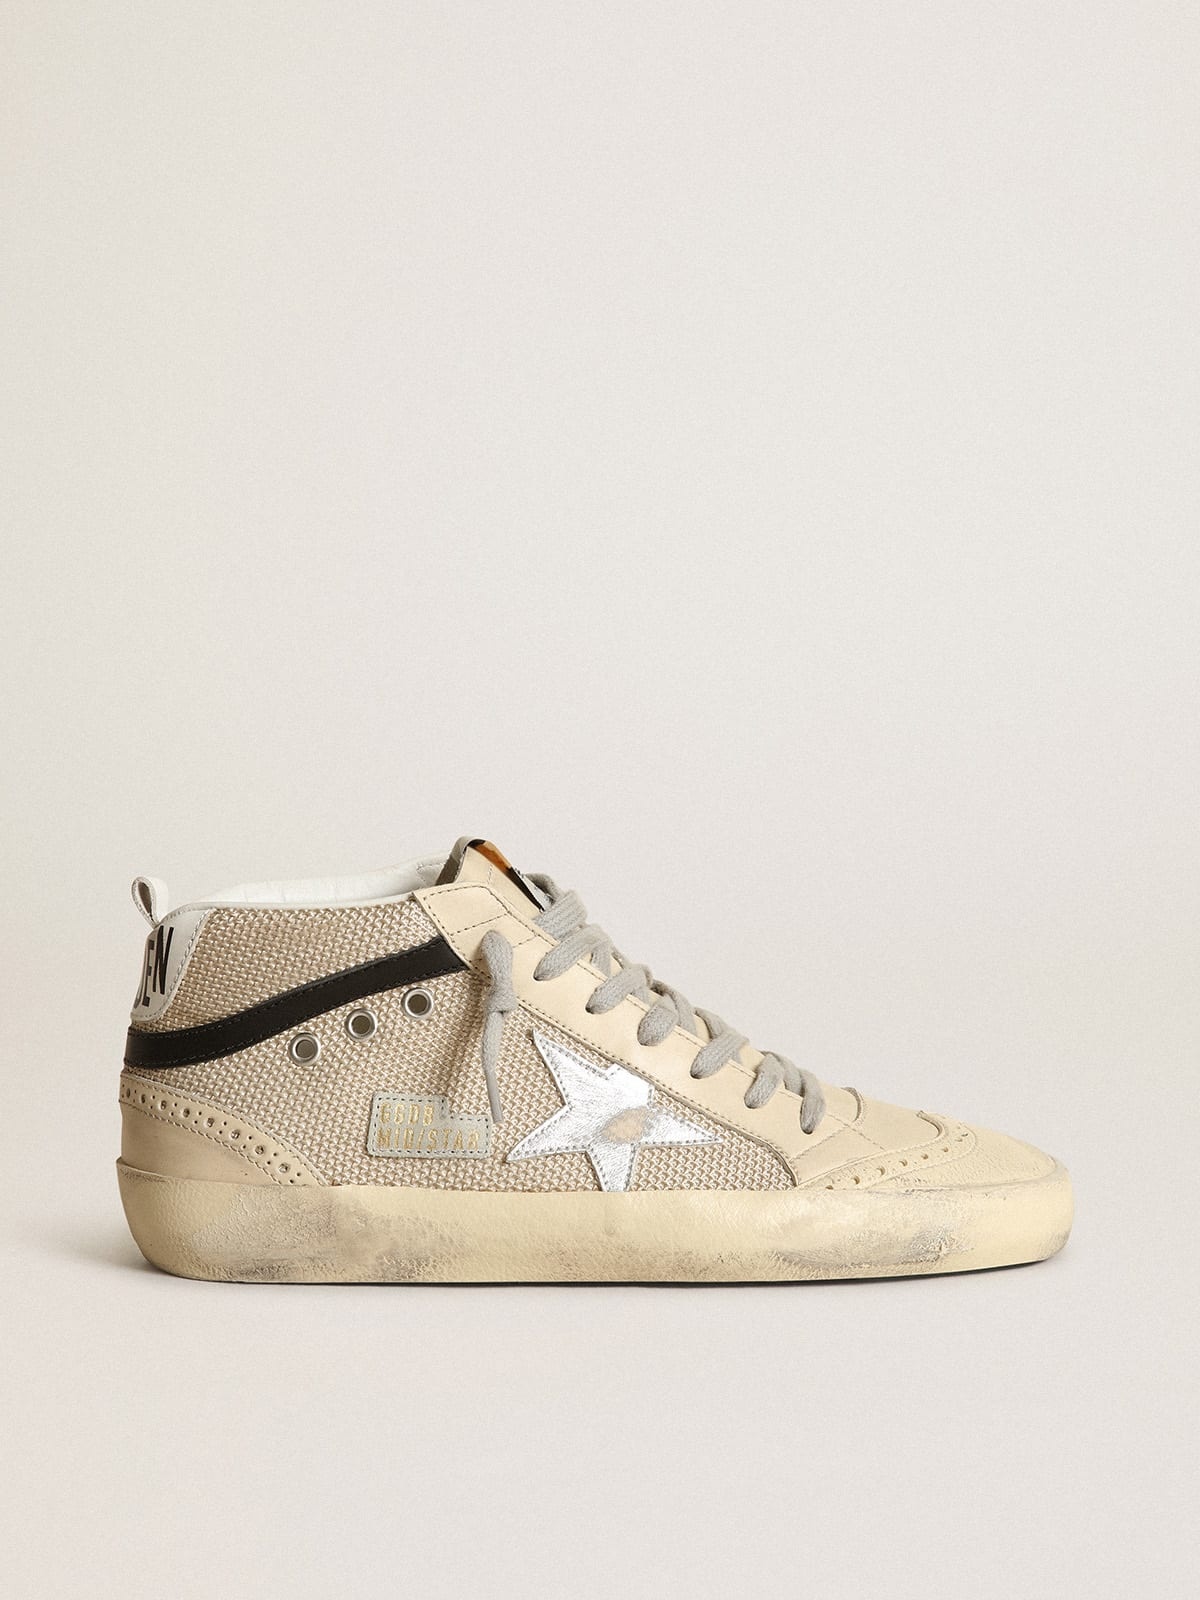 Mid Star LTD sneakers in cream-colored mesh with silver metallic leather star and black leather flas - 1